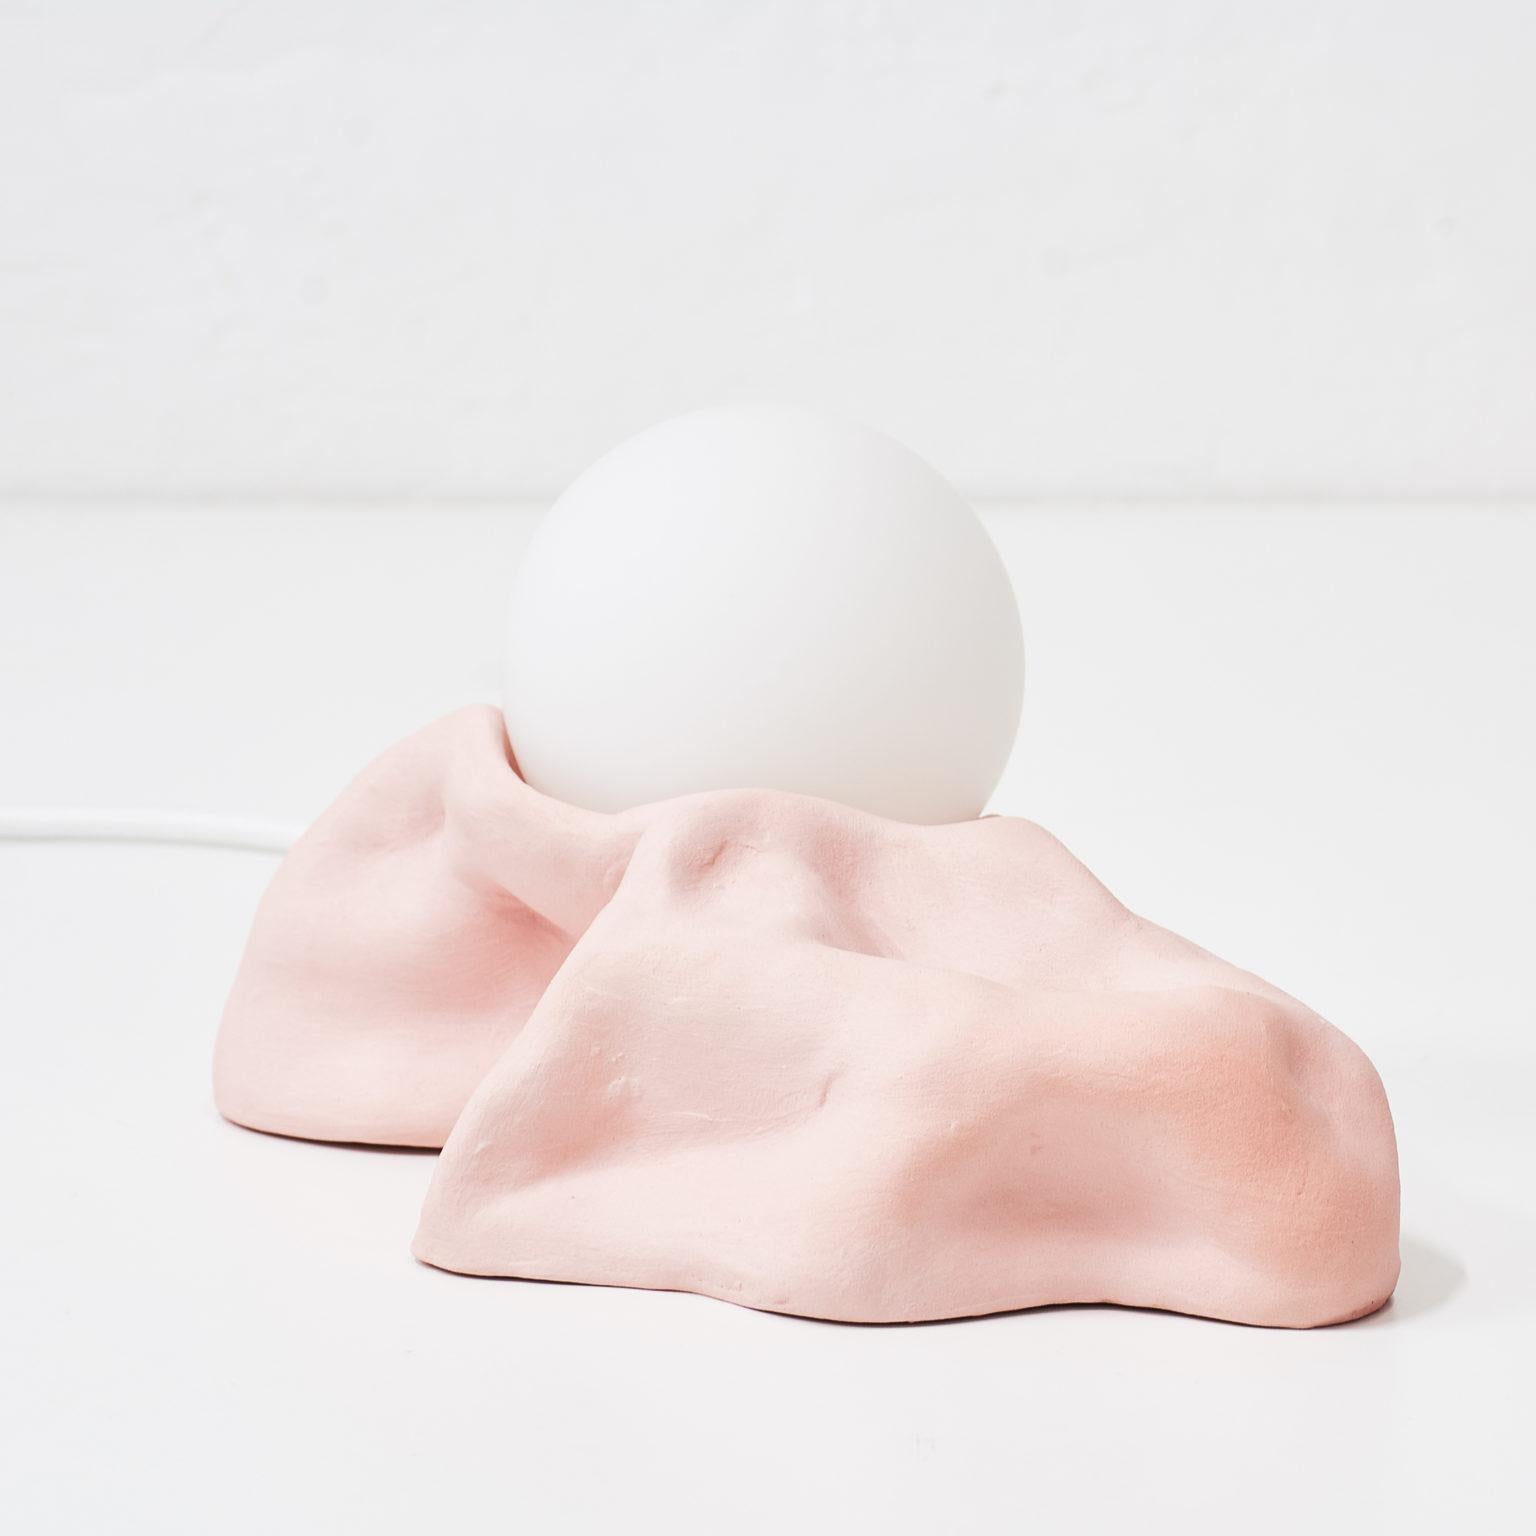 Polish Pink Lamp by Siup Studio For Sale